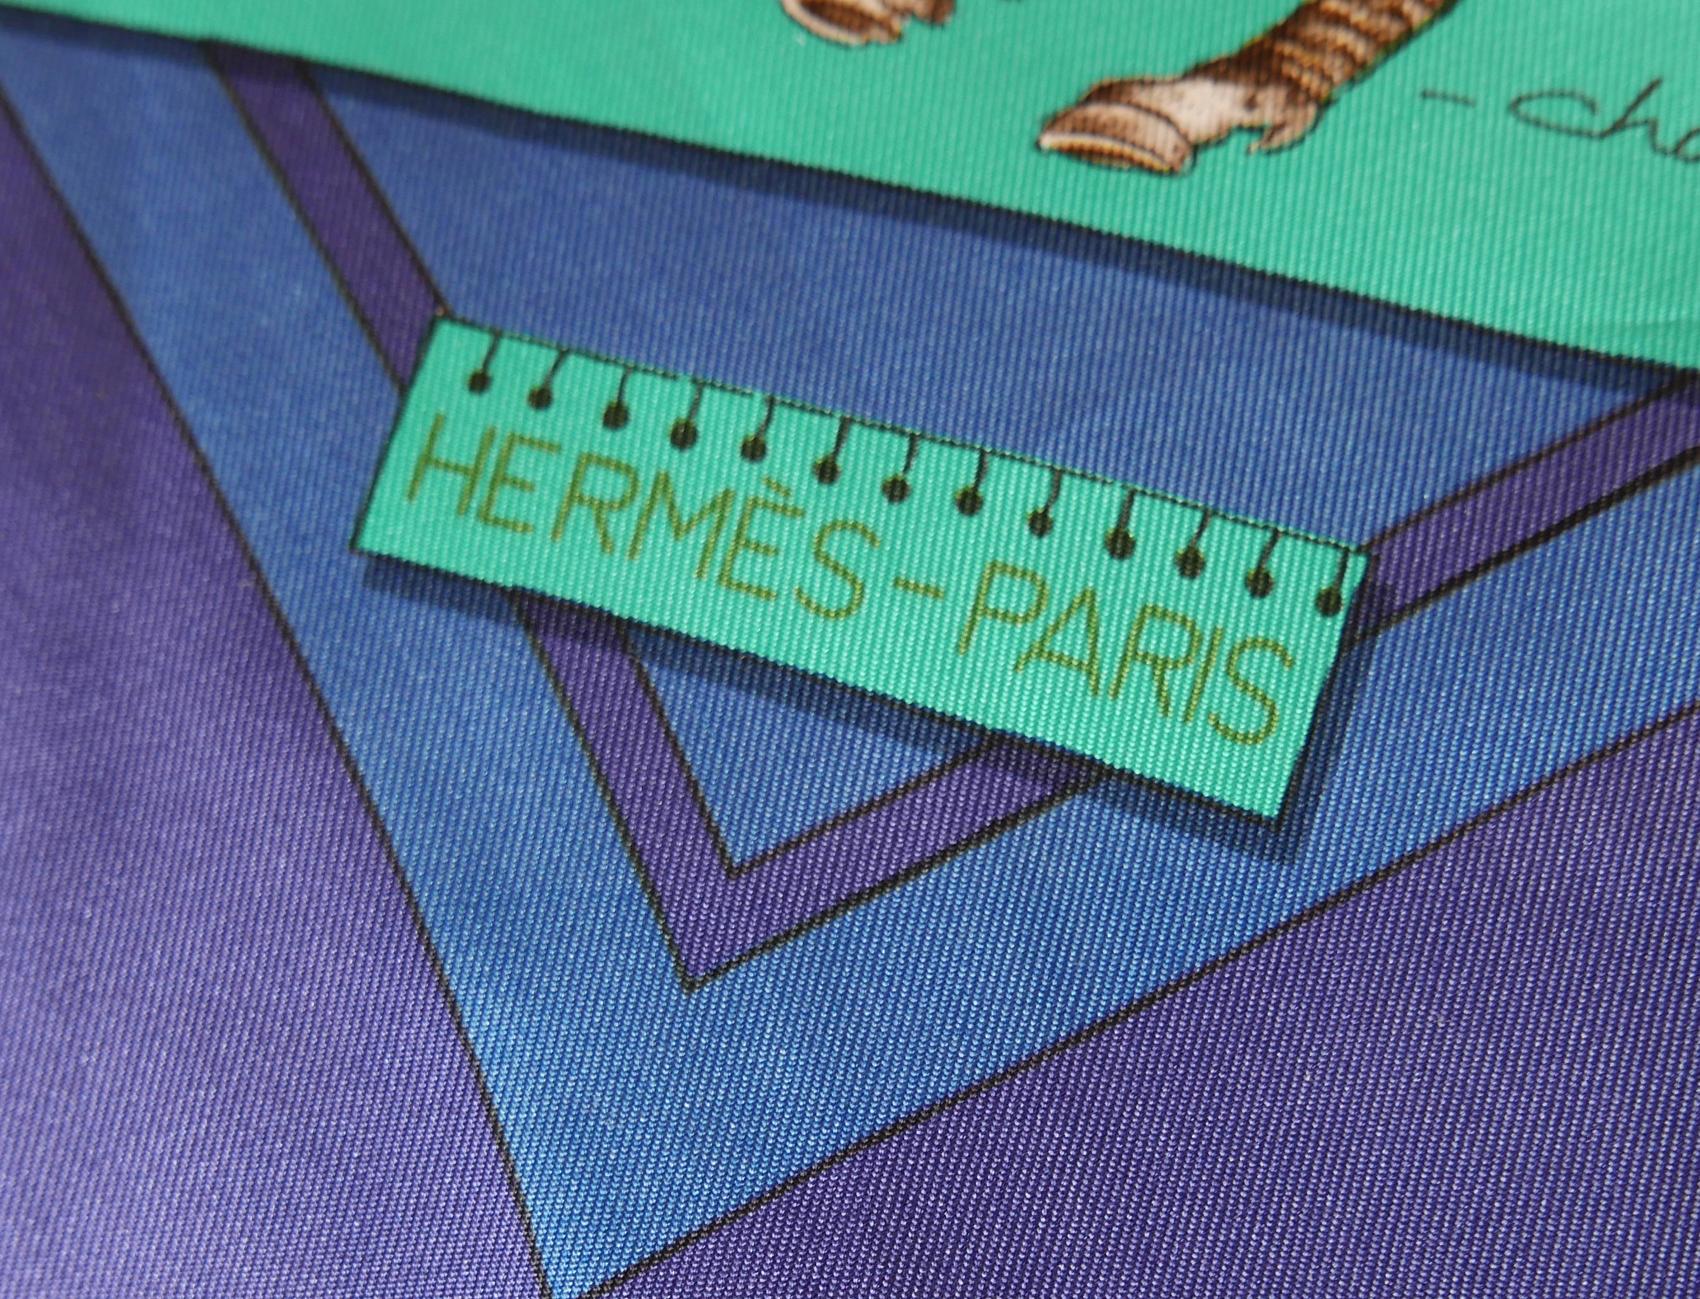 Vintage Signed Hermes “Le Monde Du Polo” Silk Scarf In Good Condition For Sale In New York, NY